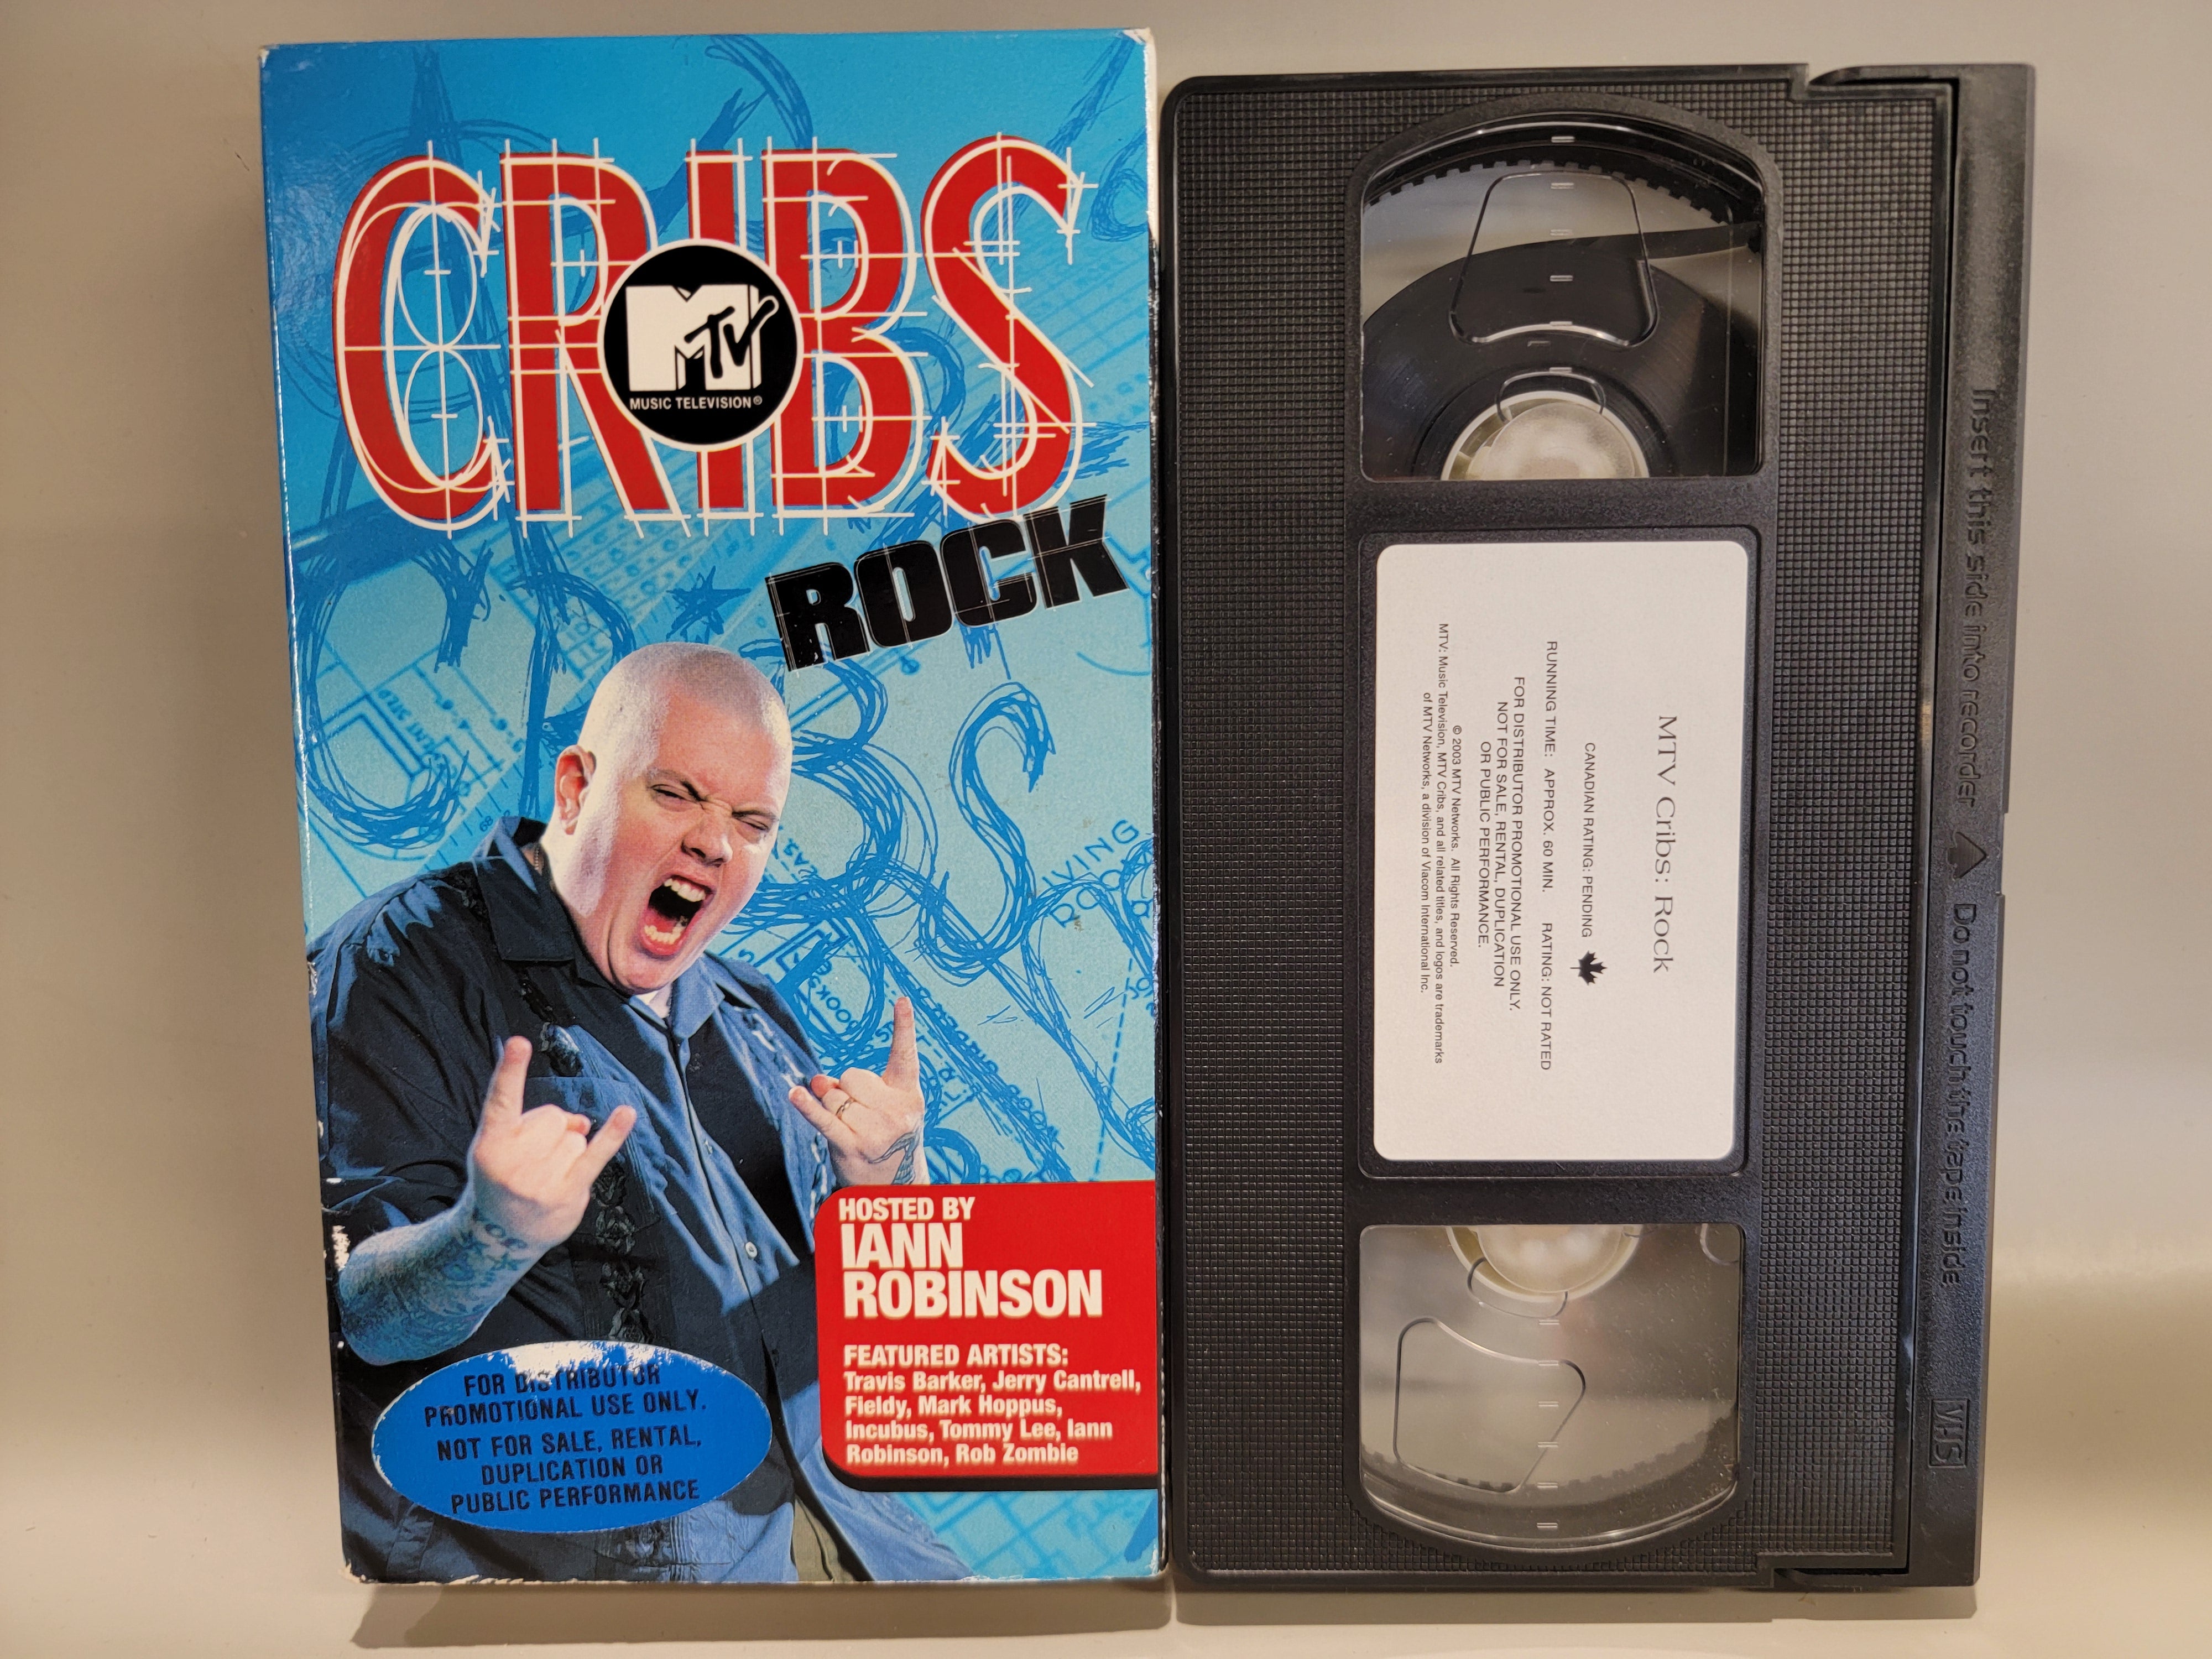 MTV CRIBS: ROCK VHS [USED]